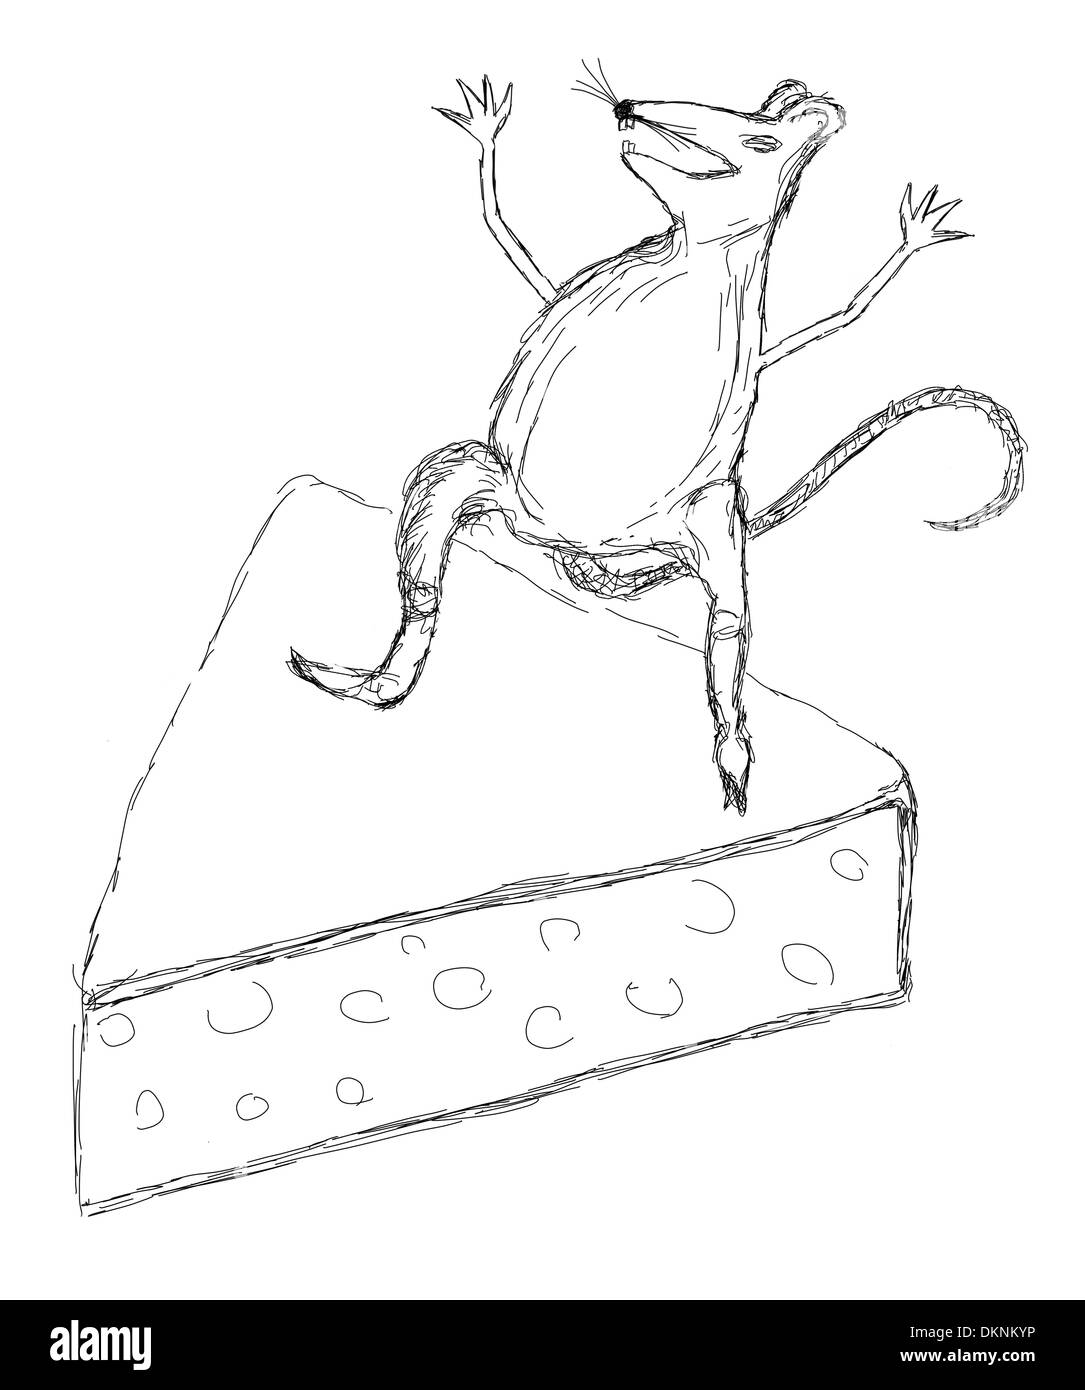 https://c8.alamy.com/comp/DKNKYP/illustration-or-drawing-of-a-rat-standing-hands-up-on-a-piece-of-cheese-DKNKYP.jpg